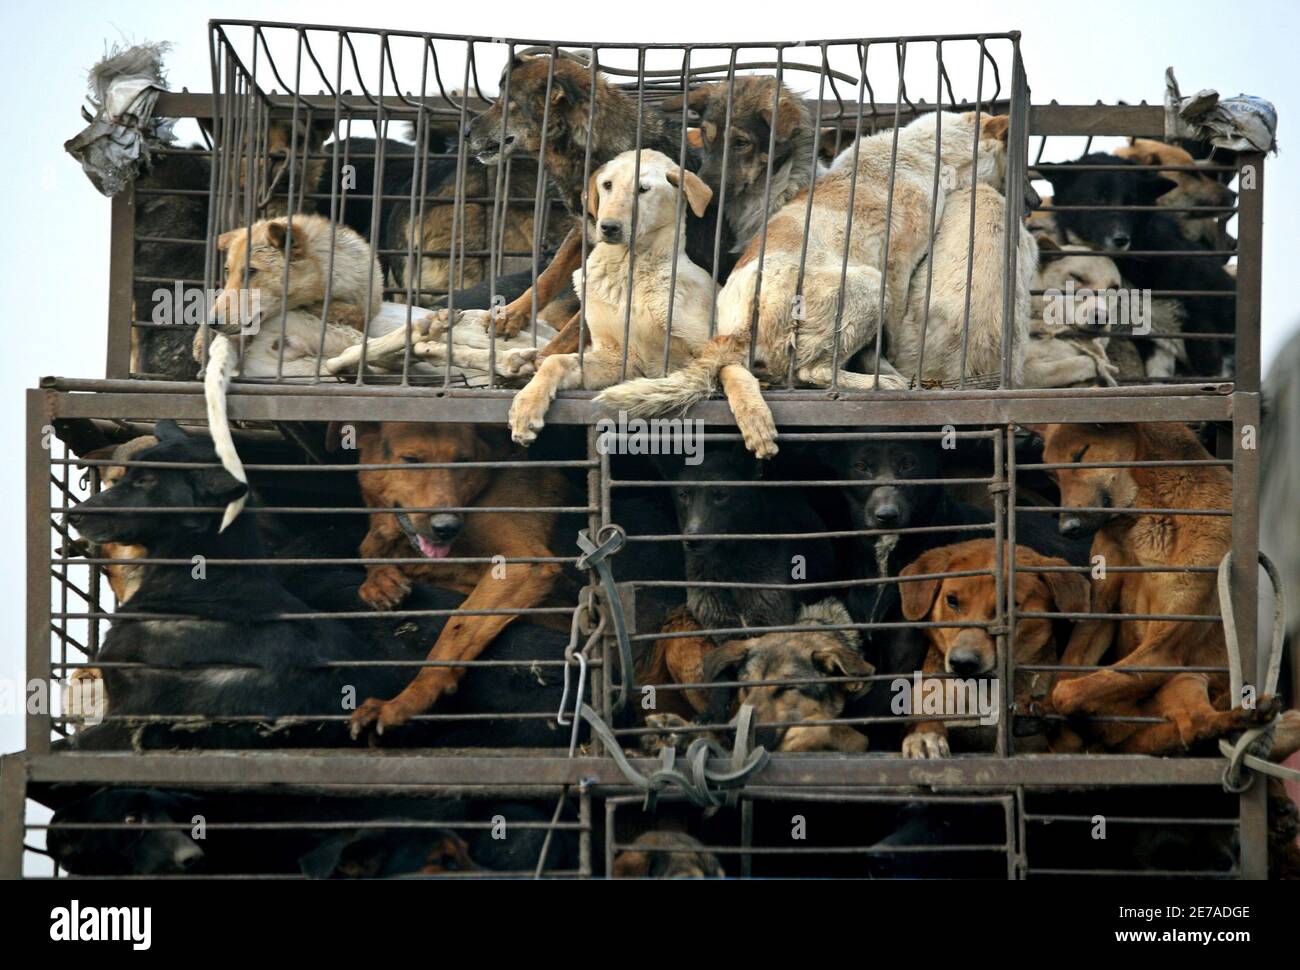 Dogs look out of their cages from a truck on a motorway on the outskirts of  China's capital Beijing April 8, 2006. Dog meat is a speciality in the  Chinese cuisine, especially